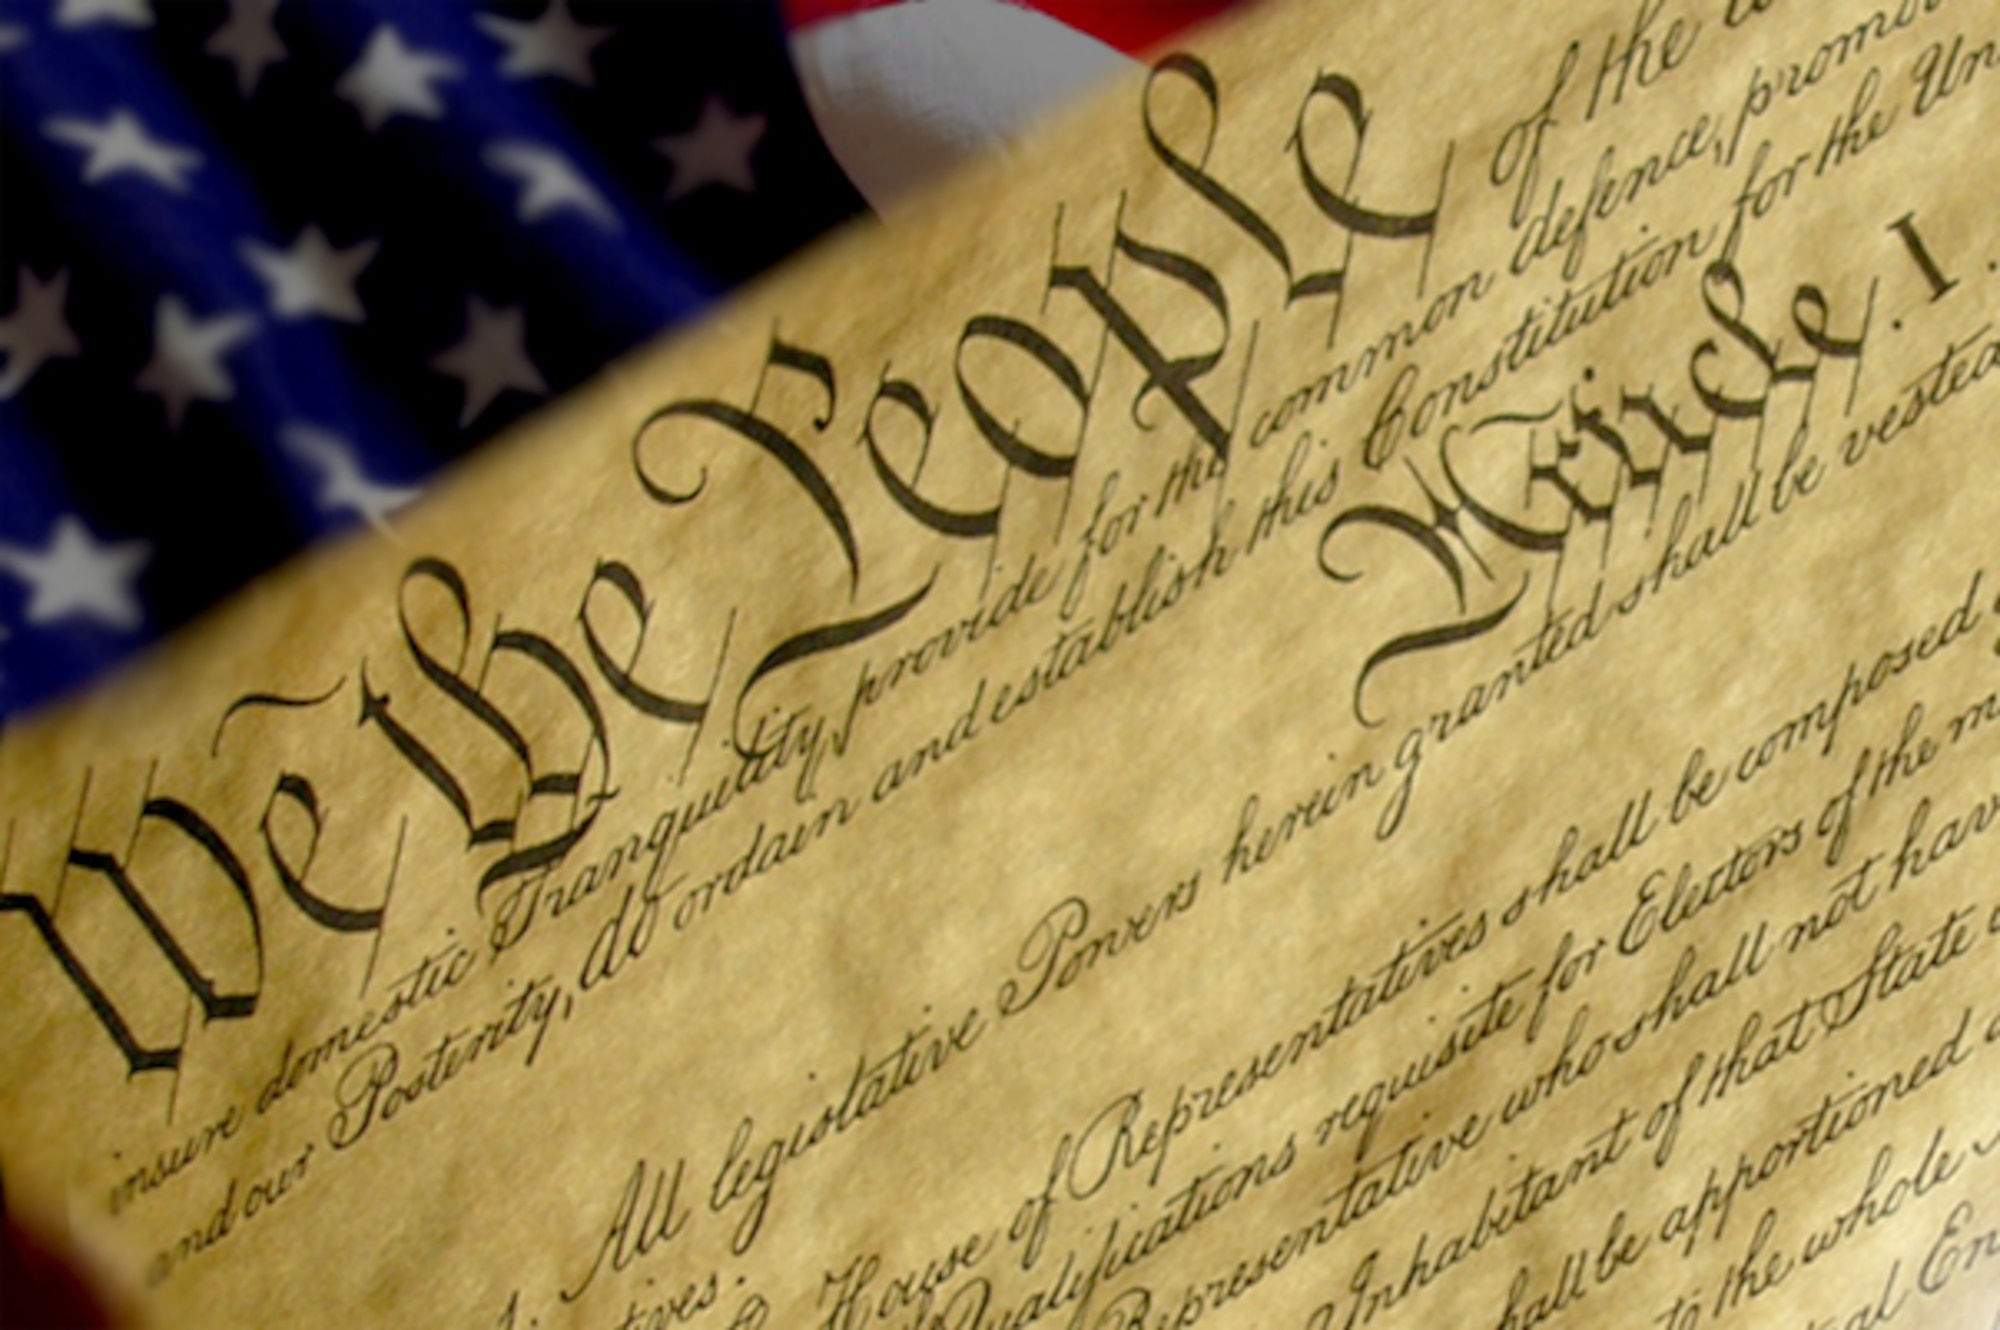 Where Is the Constitution On Display? - Constitution of the United States